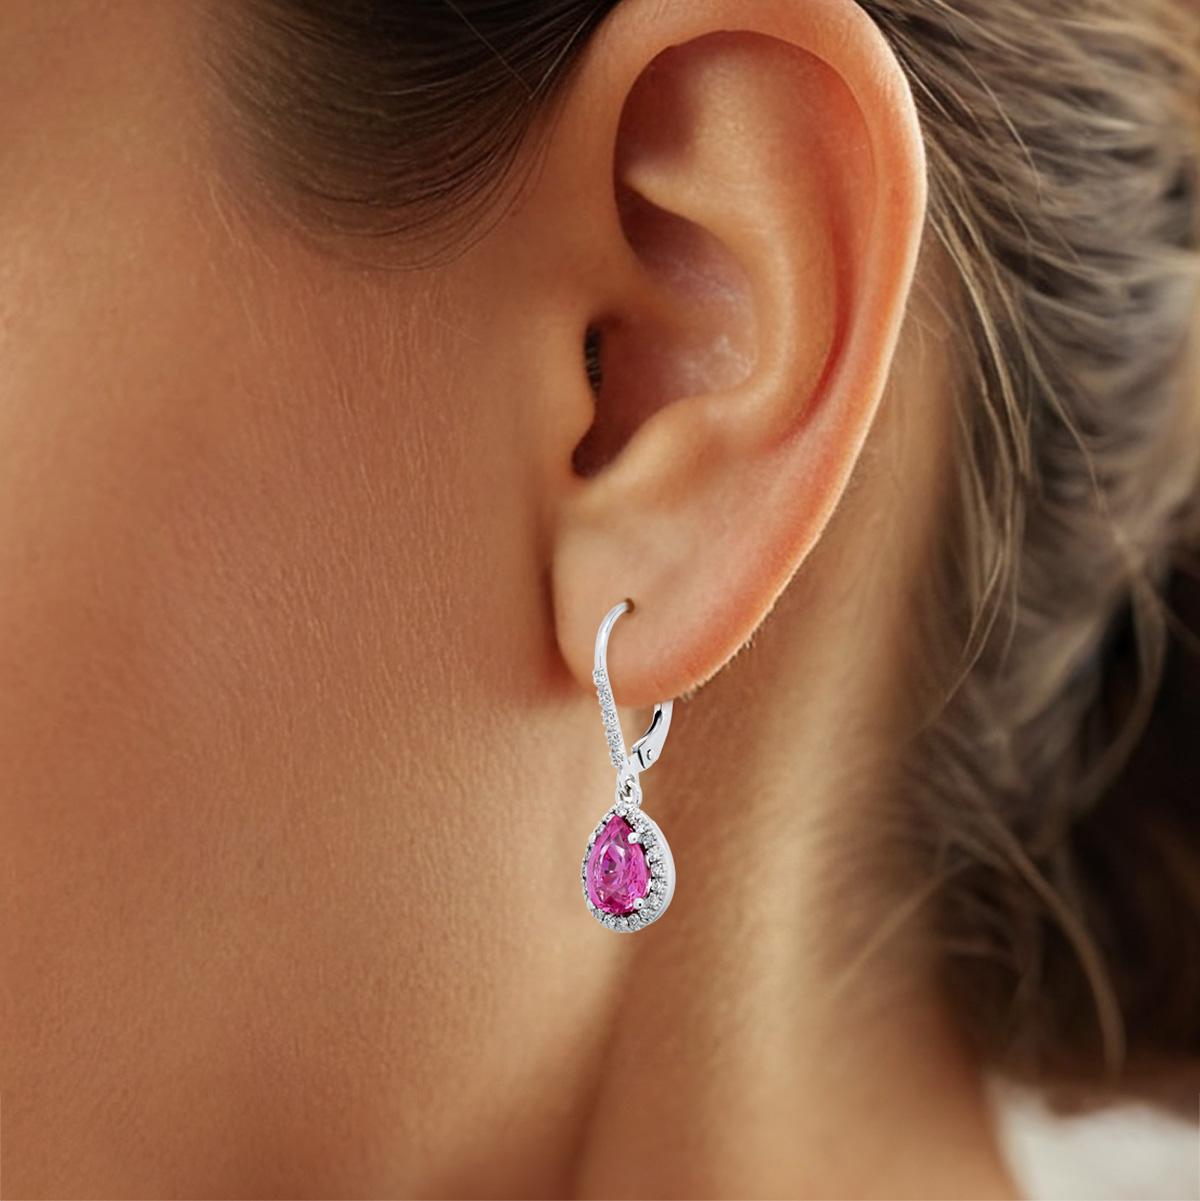 Women's Certified Natural 2.53 Сts Pink Sapphire Earrings set in 14 KWG with Diamonds